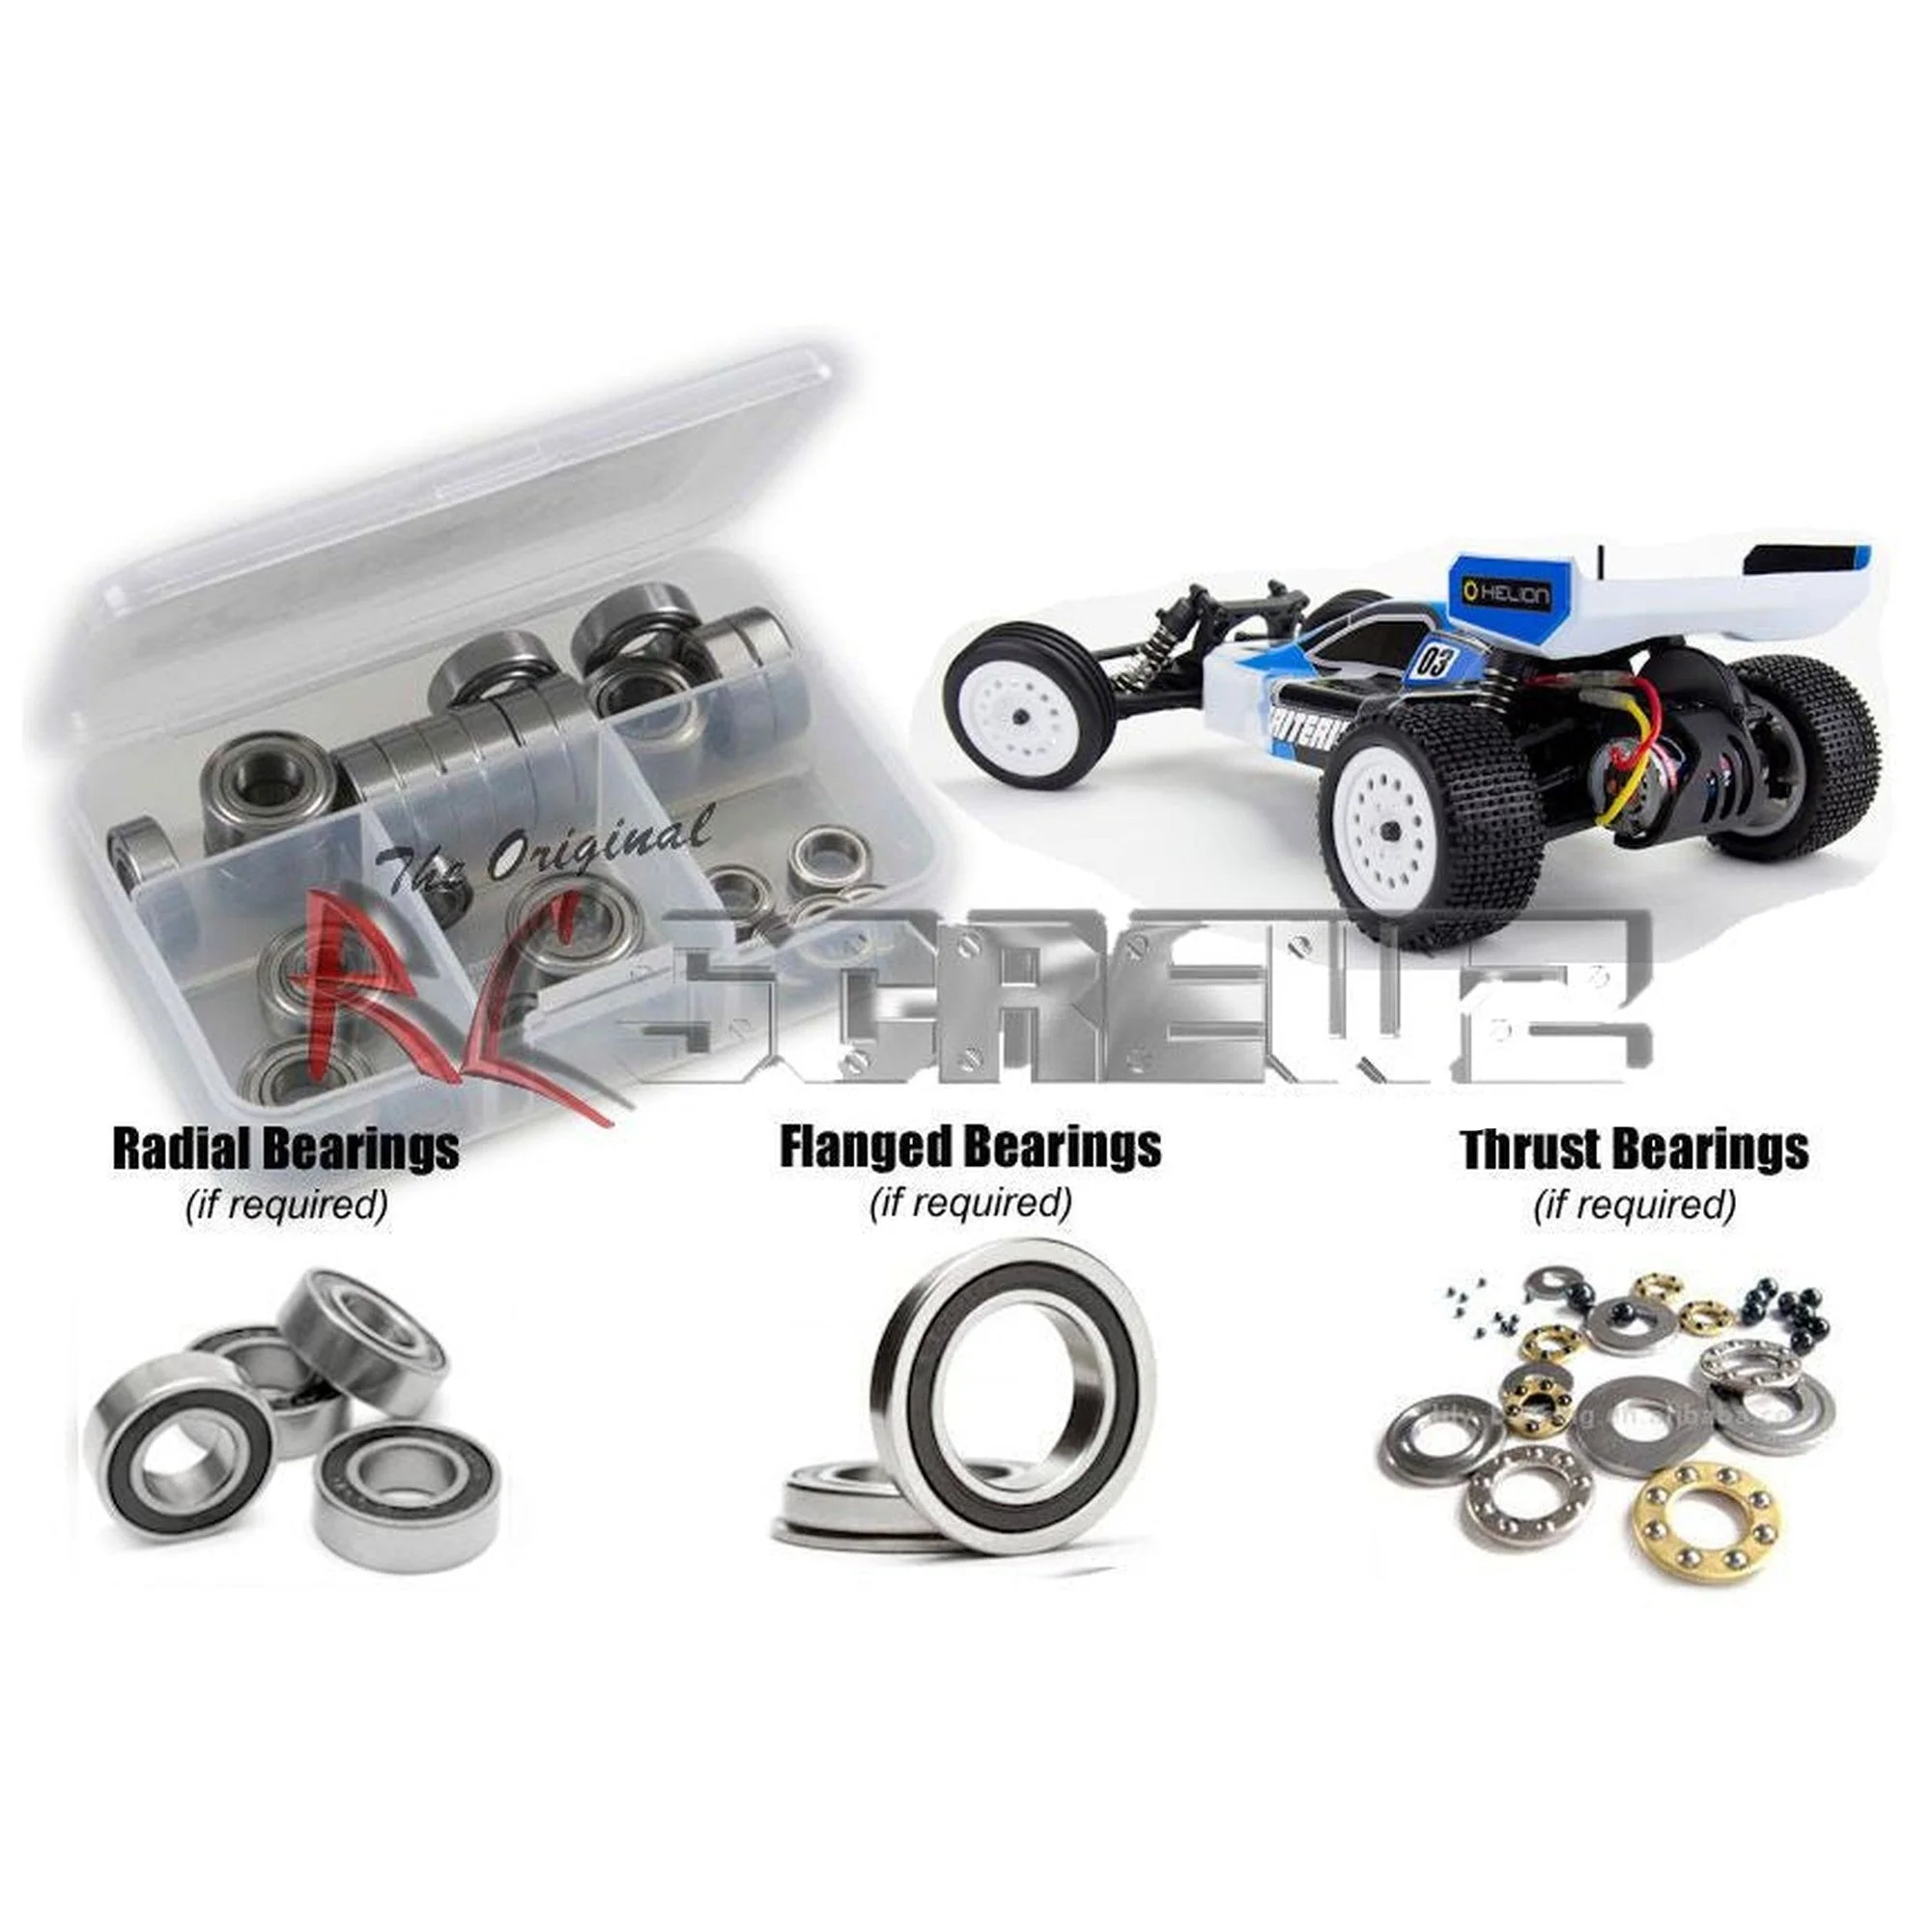 RCScrewZ Rubber Shielded Bearing Kit helrc002r for Helion RC Criterion 1/10th - Picture 1 of 12